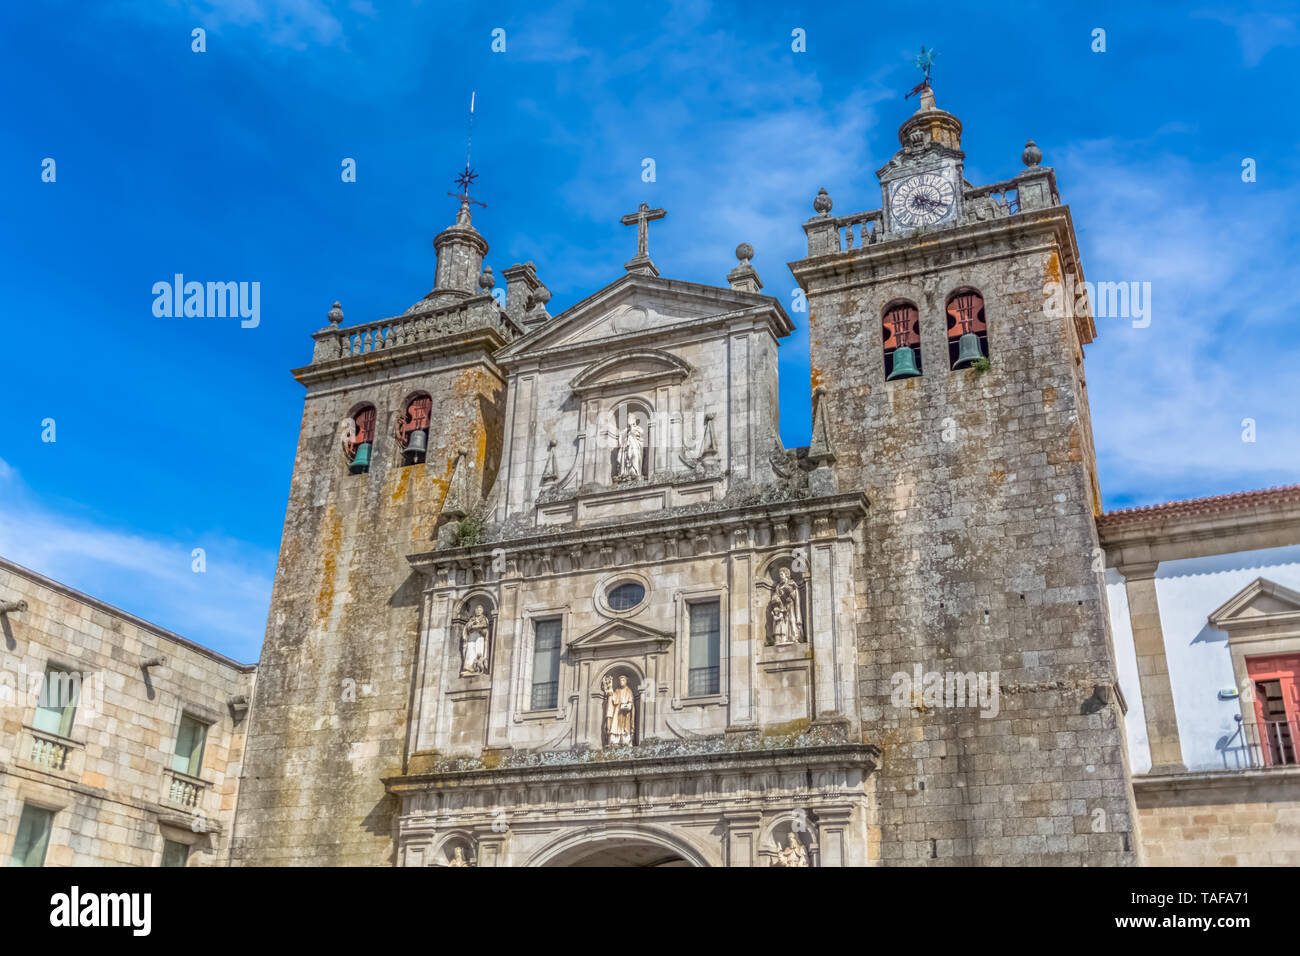 Viseu / Portugal - 04 16 2019 : View at the front facade of the Cathedral of Viseu, Adro da Sé Cathedral de Viseu, architectural icon of the city of V Stock Photo